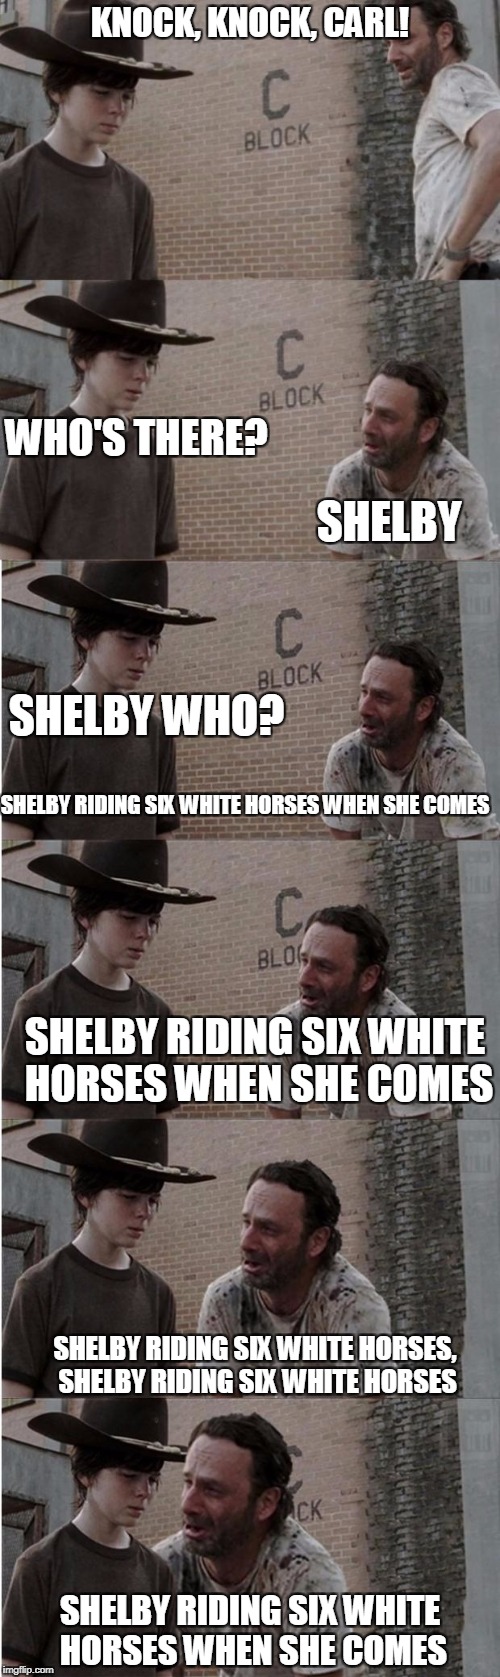 Rick and Carl Longer Meme | KNOCK, KNOCK, CARL! WHO'S THERE? SHELBY; SHELBY WHO? SHELBY RIDING SIX WHITE HORSES WHEN SHE COMES; SHELBY RIDING SIX WHITE HORSES WHEN SHE COMES; SHELBY RIDING SIX WHITE HORSES, SHELBY RIDING SIX WHITE HORSES; SHELBY RIDING SIX WHITE HORSES WHEN SHE COMES | image tagged in memes,rick and carl longer | made w/ Imgflip meme maker